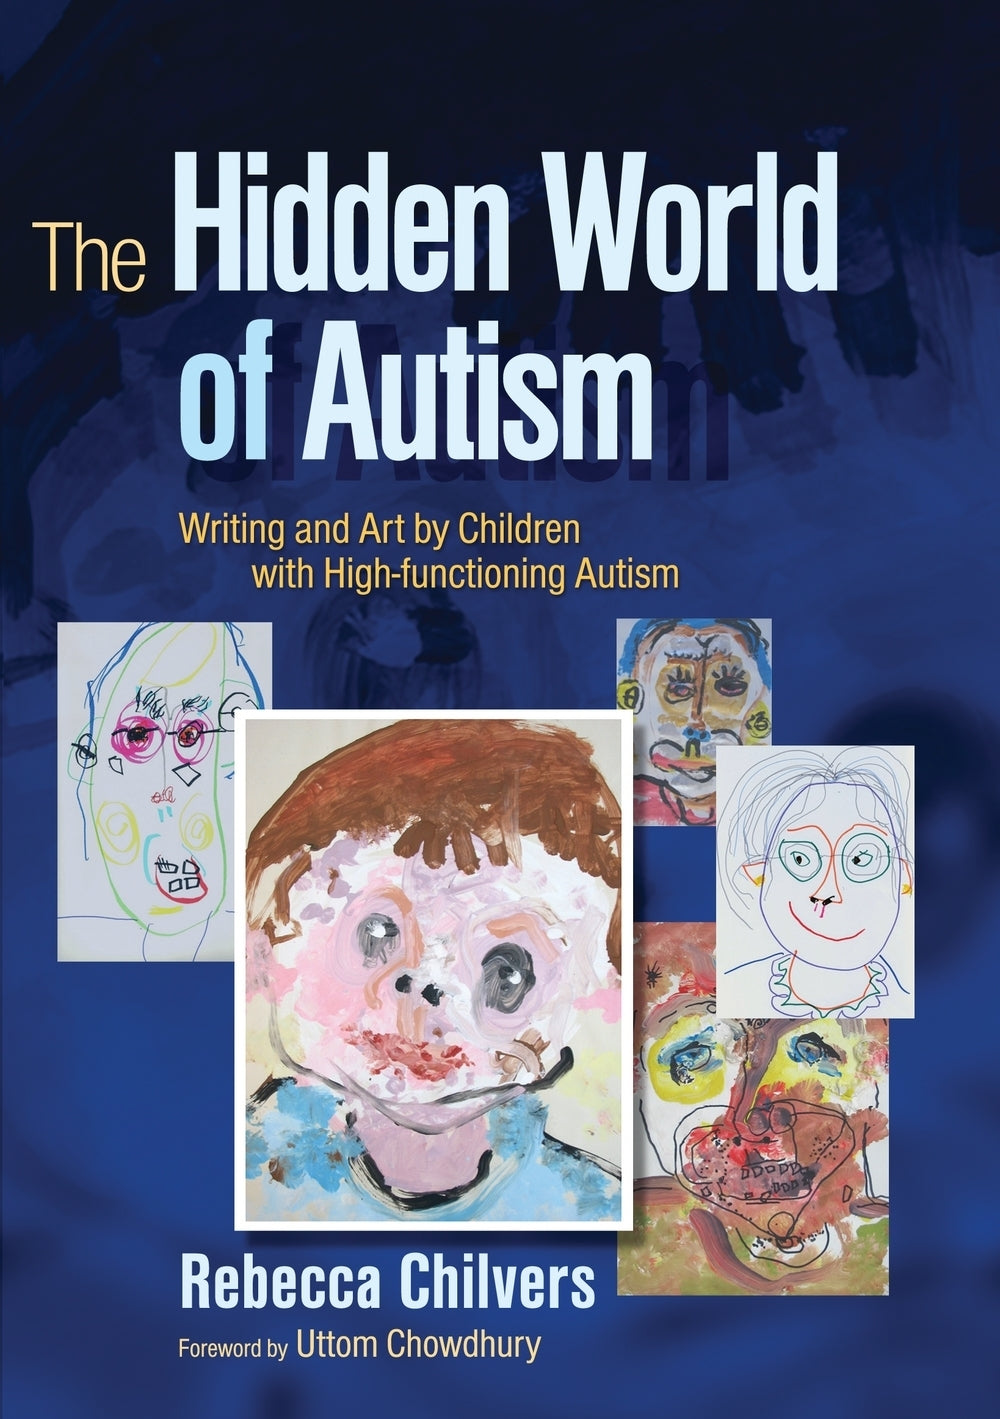 The Hidden World of Autism by Rebecca Chilvers, Uttom Chowdhury